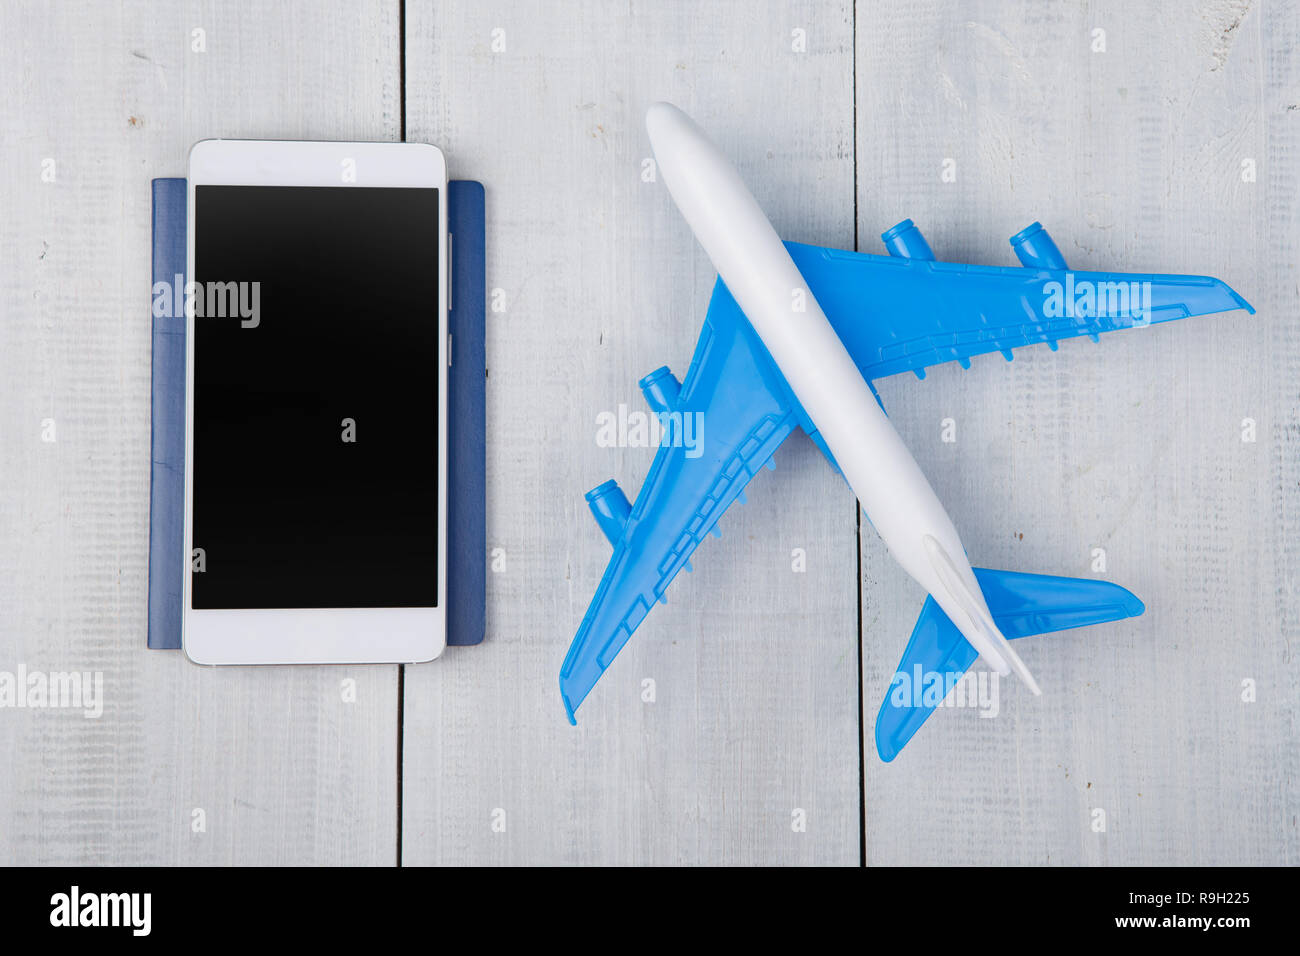 Adventure time - plane, passport and blank smartphone on white wooden table Stock Photo